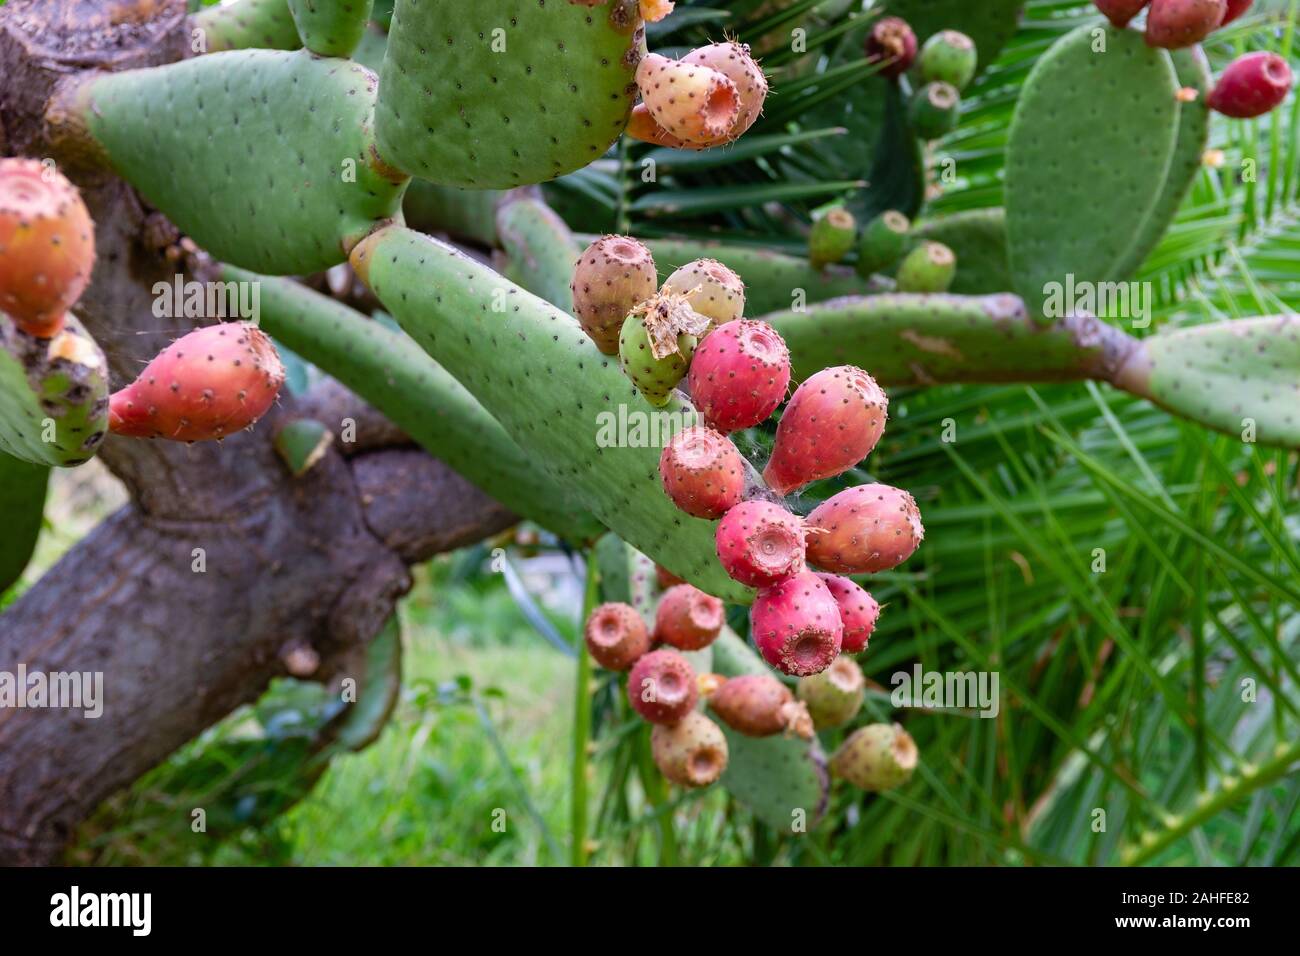 Close-up of prickly pear fruits on pad. Apulia region, Italy Stock Photo